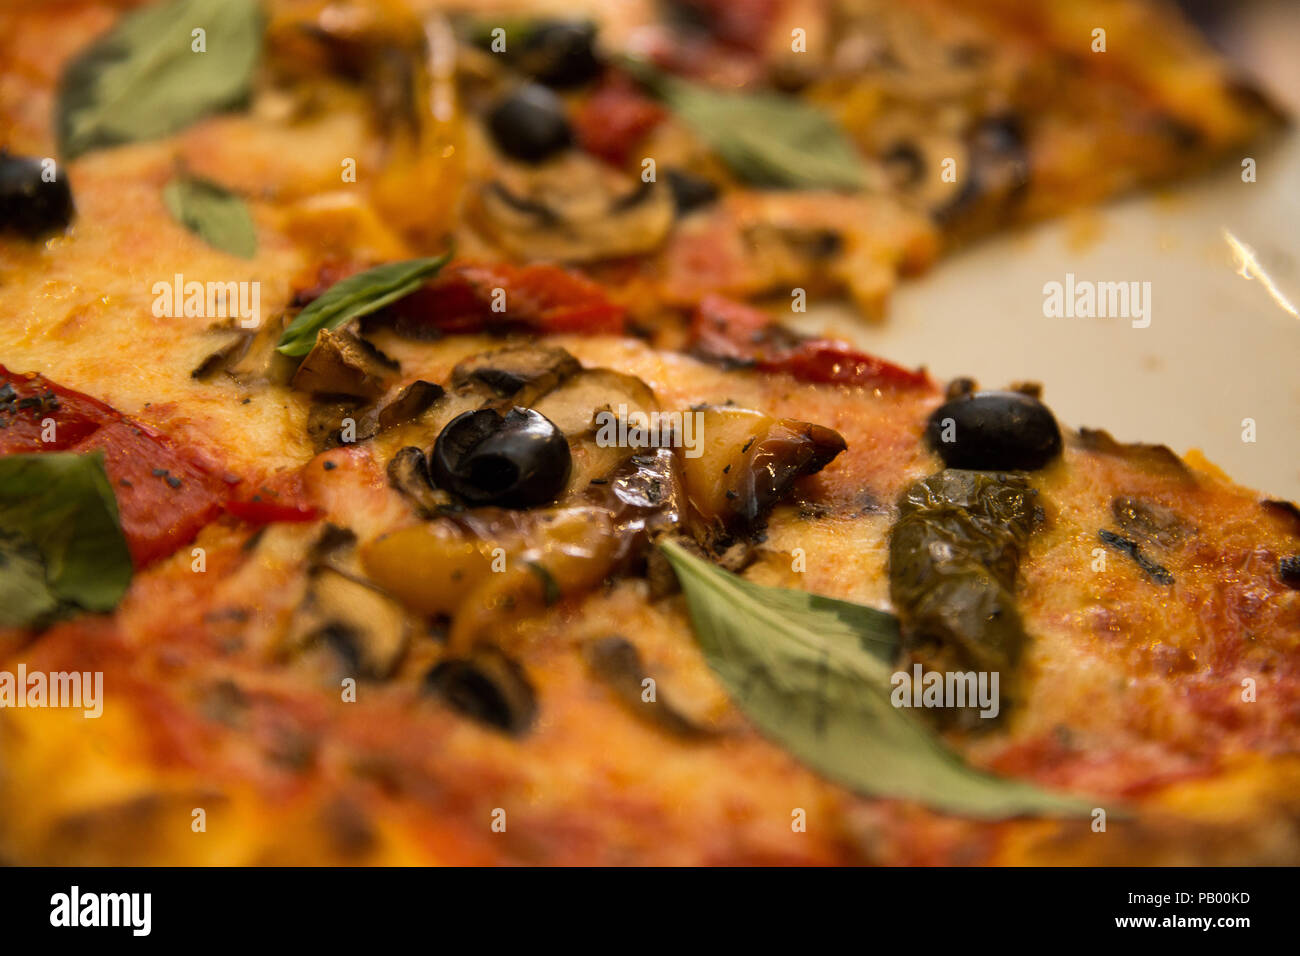 Close up of a pizza with a slice missing Stock Photo